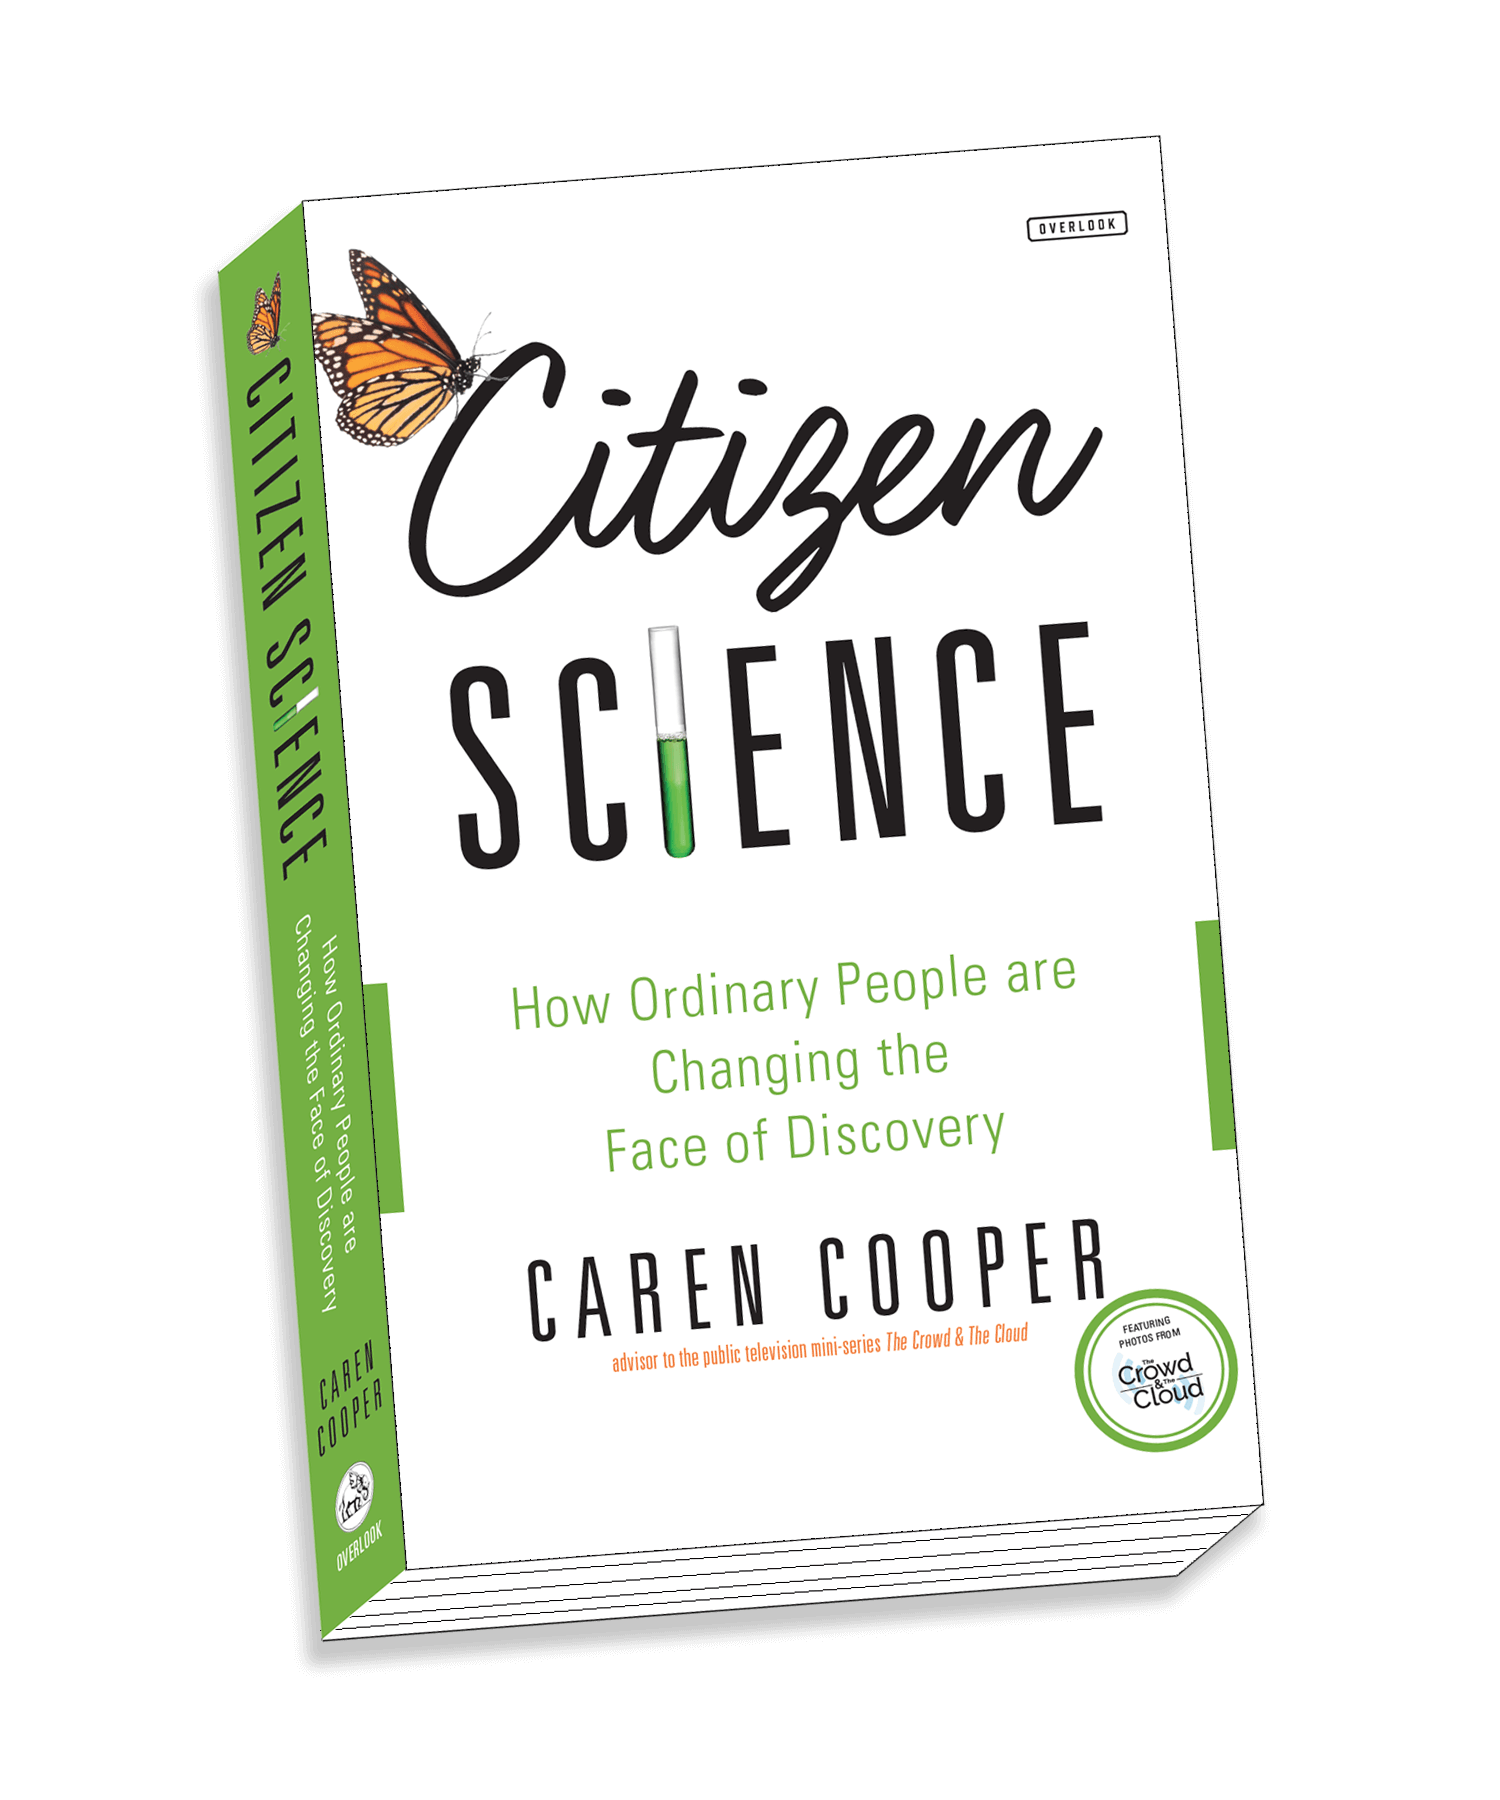 Book Image: Citizen Science by Caren Cooper